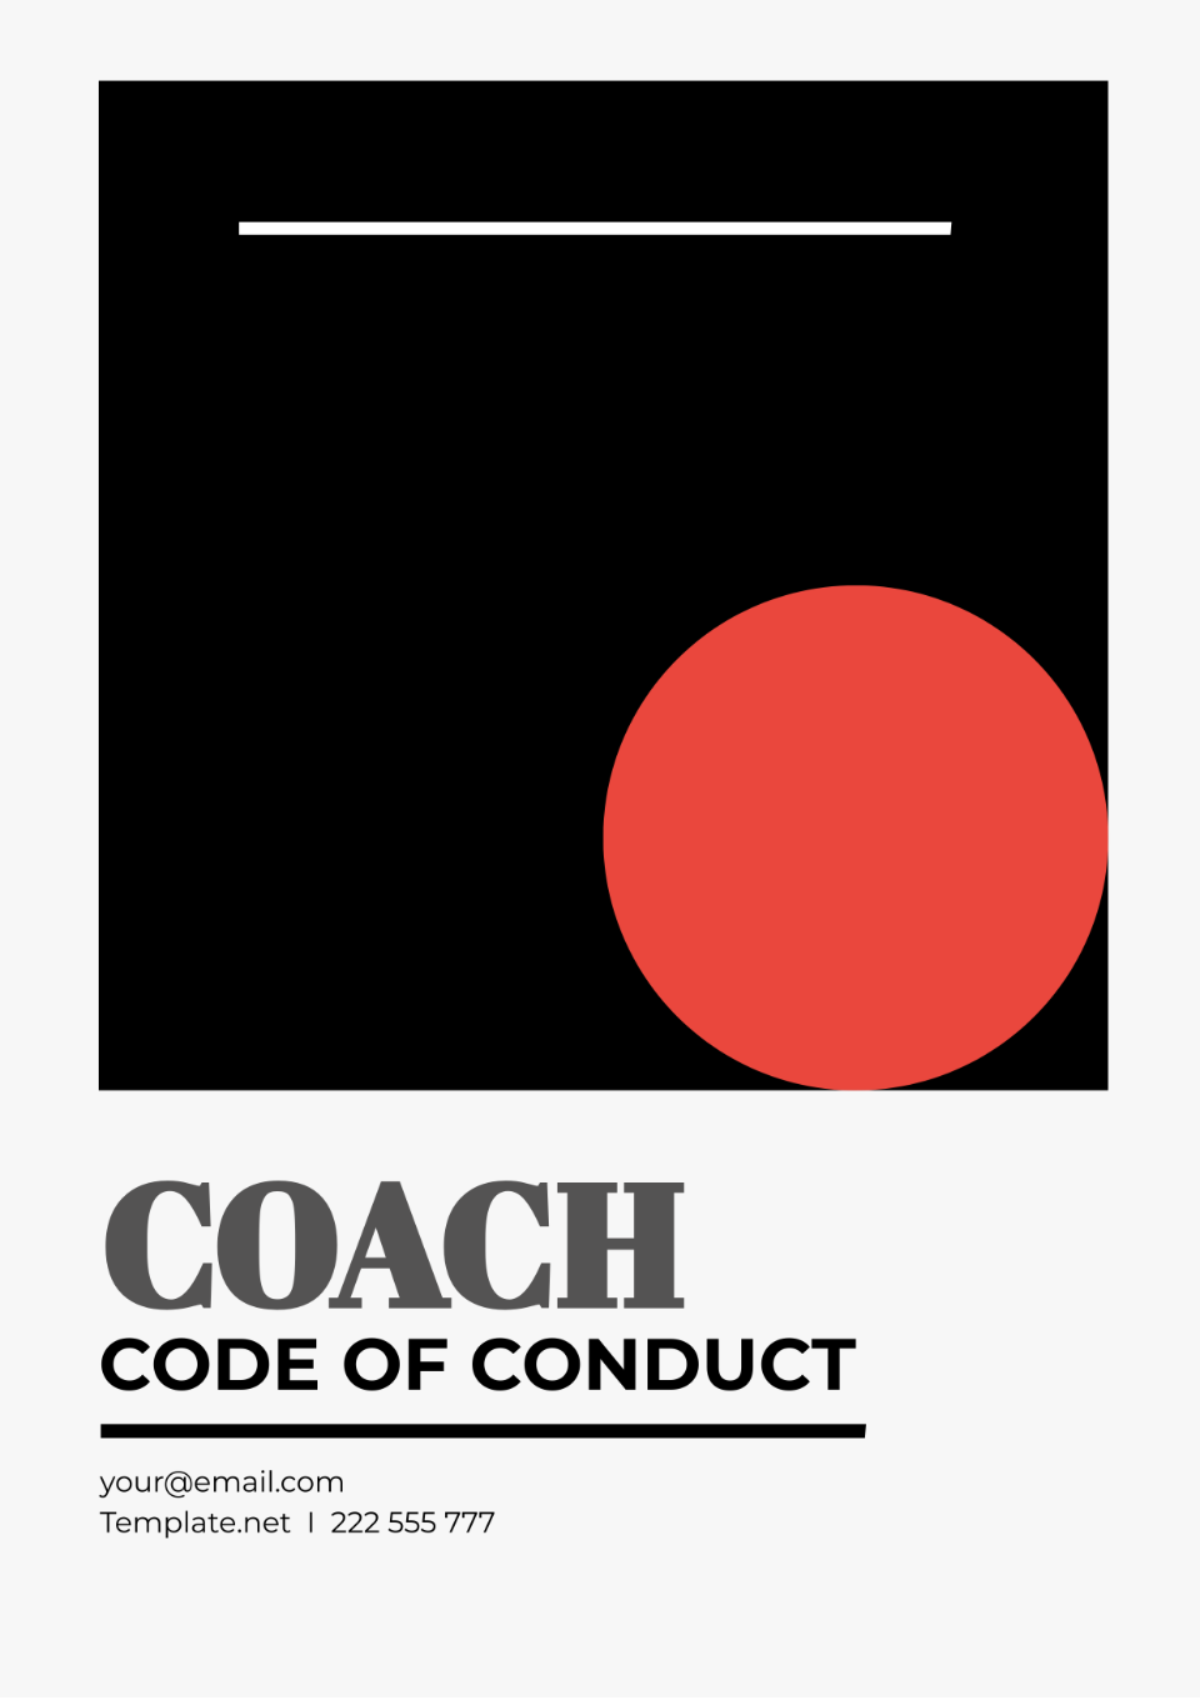 Coach Code of Conduct Template